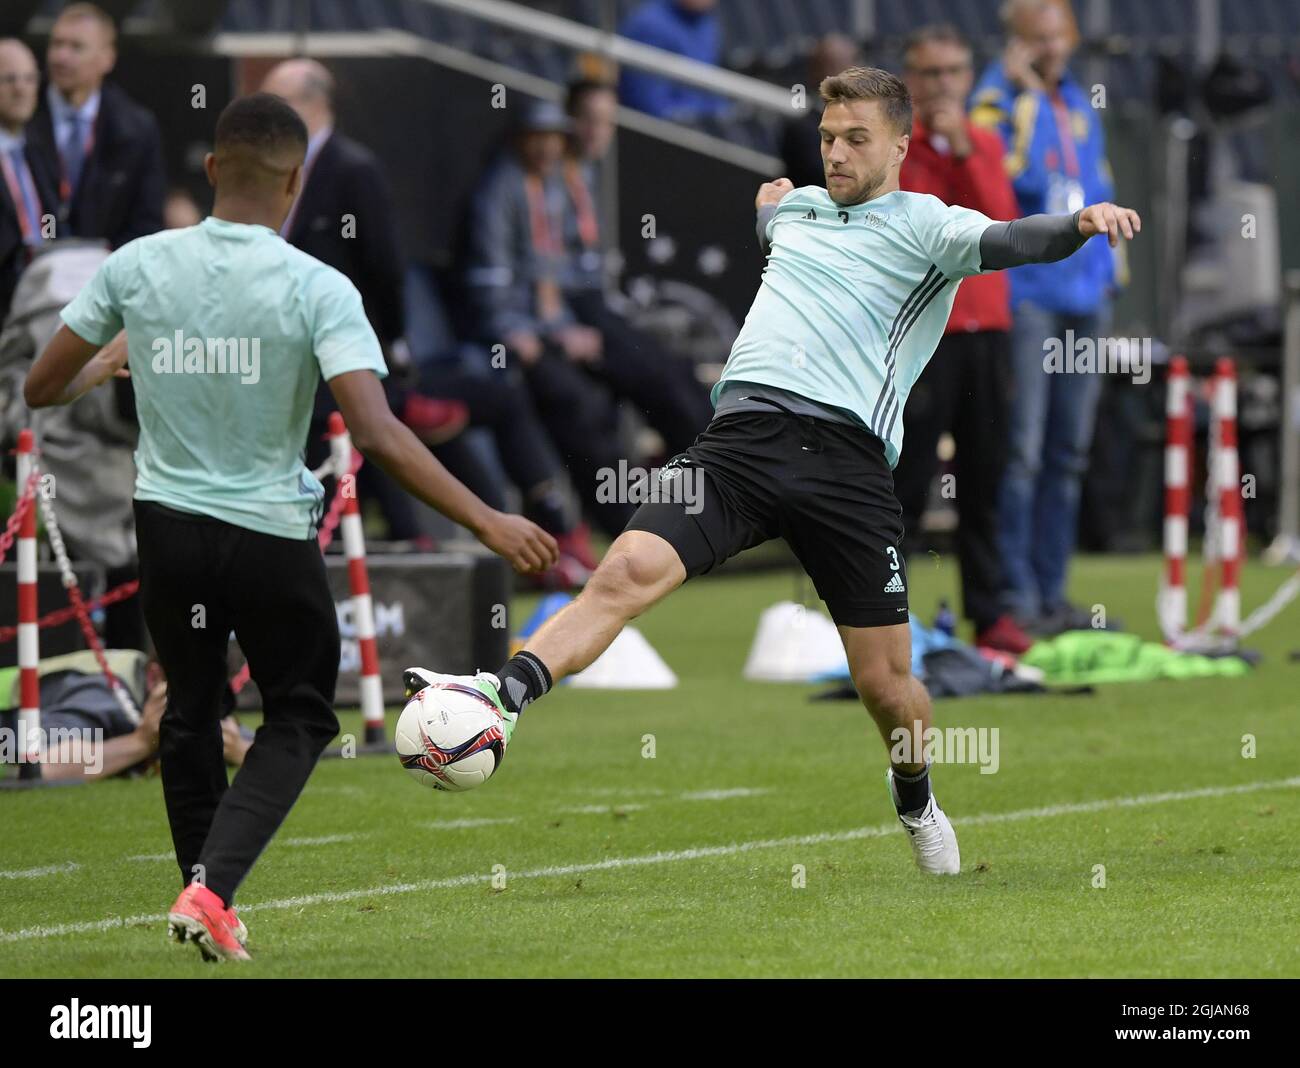 Ajax Joël Veltman (R) during the training session at the Friends Arena in Solna, northern Stockholm, Tuesday May 23, 2017, the day before the UEFA Europa League May 24 football final betwen Ajax Amsterdam and Manchester United. Photo: Anders Wiklund / TT kod 10040  Stock Photo